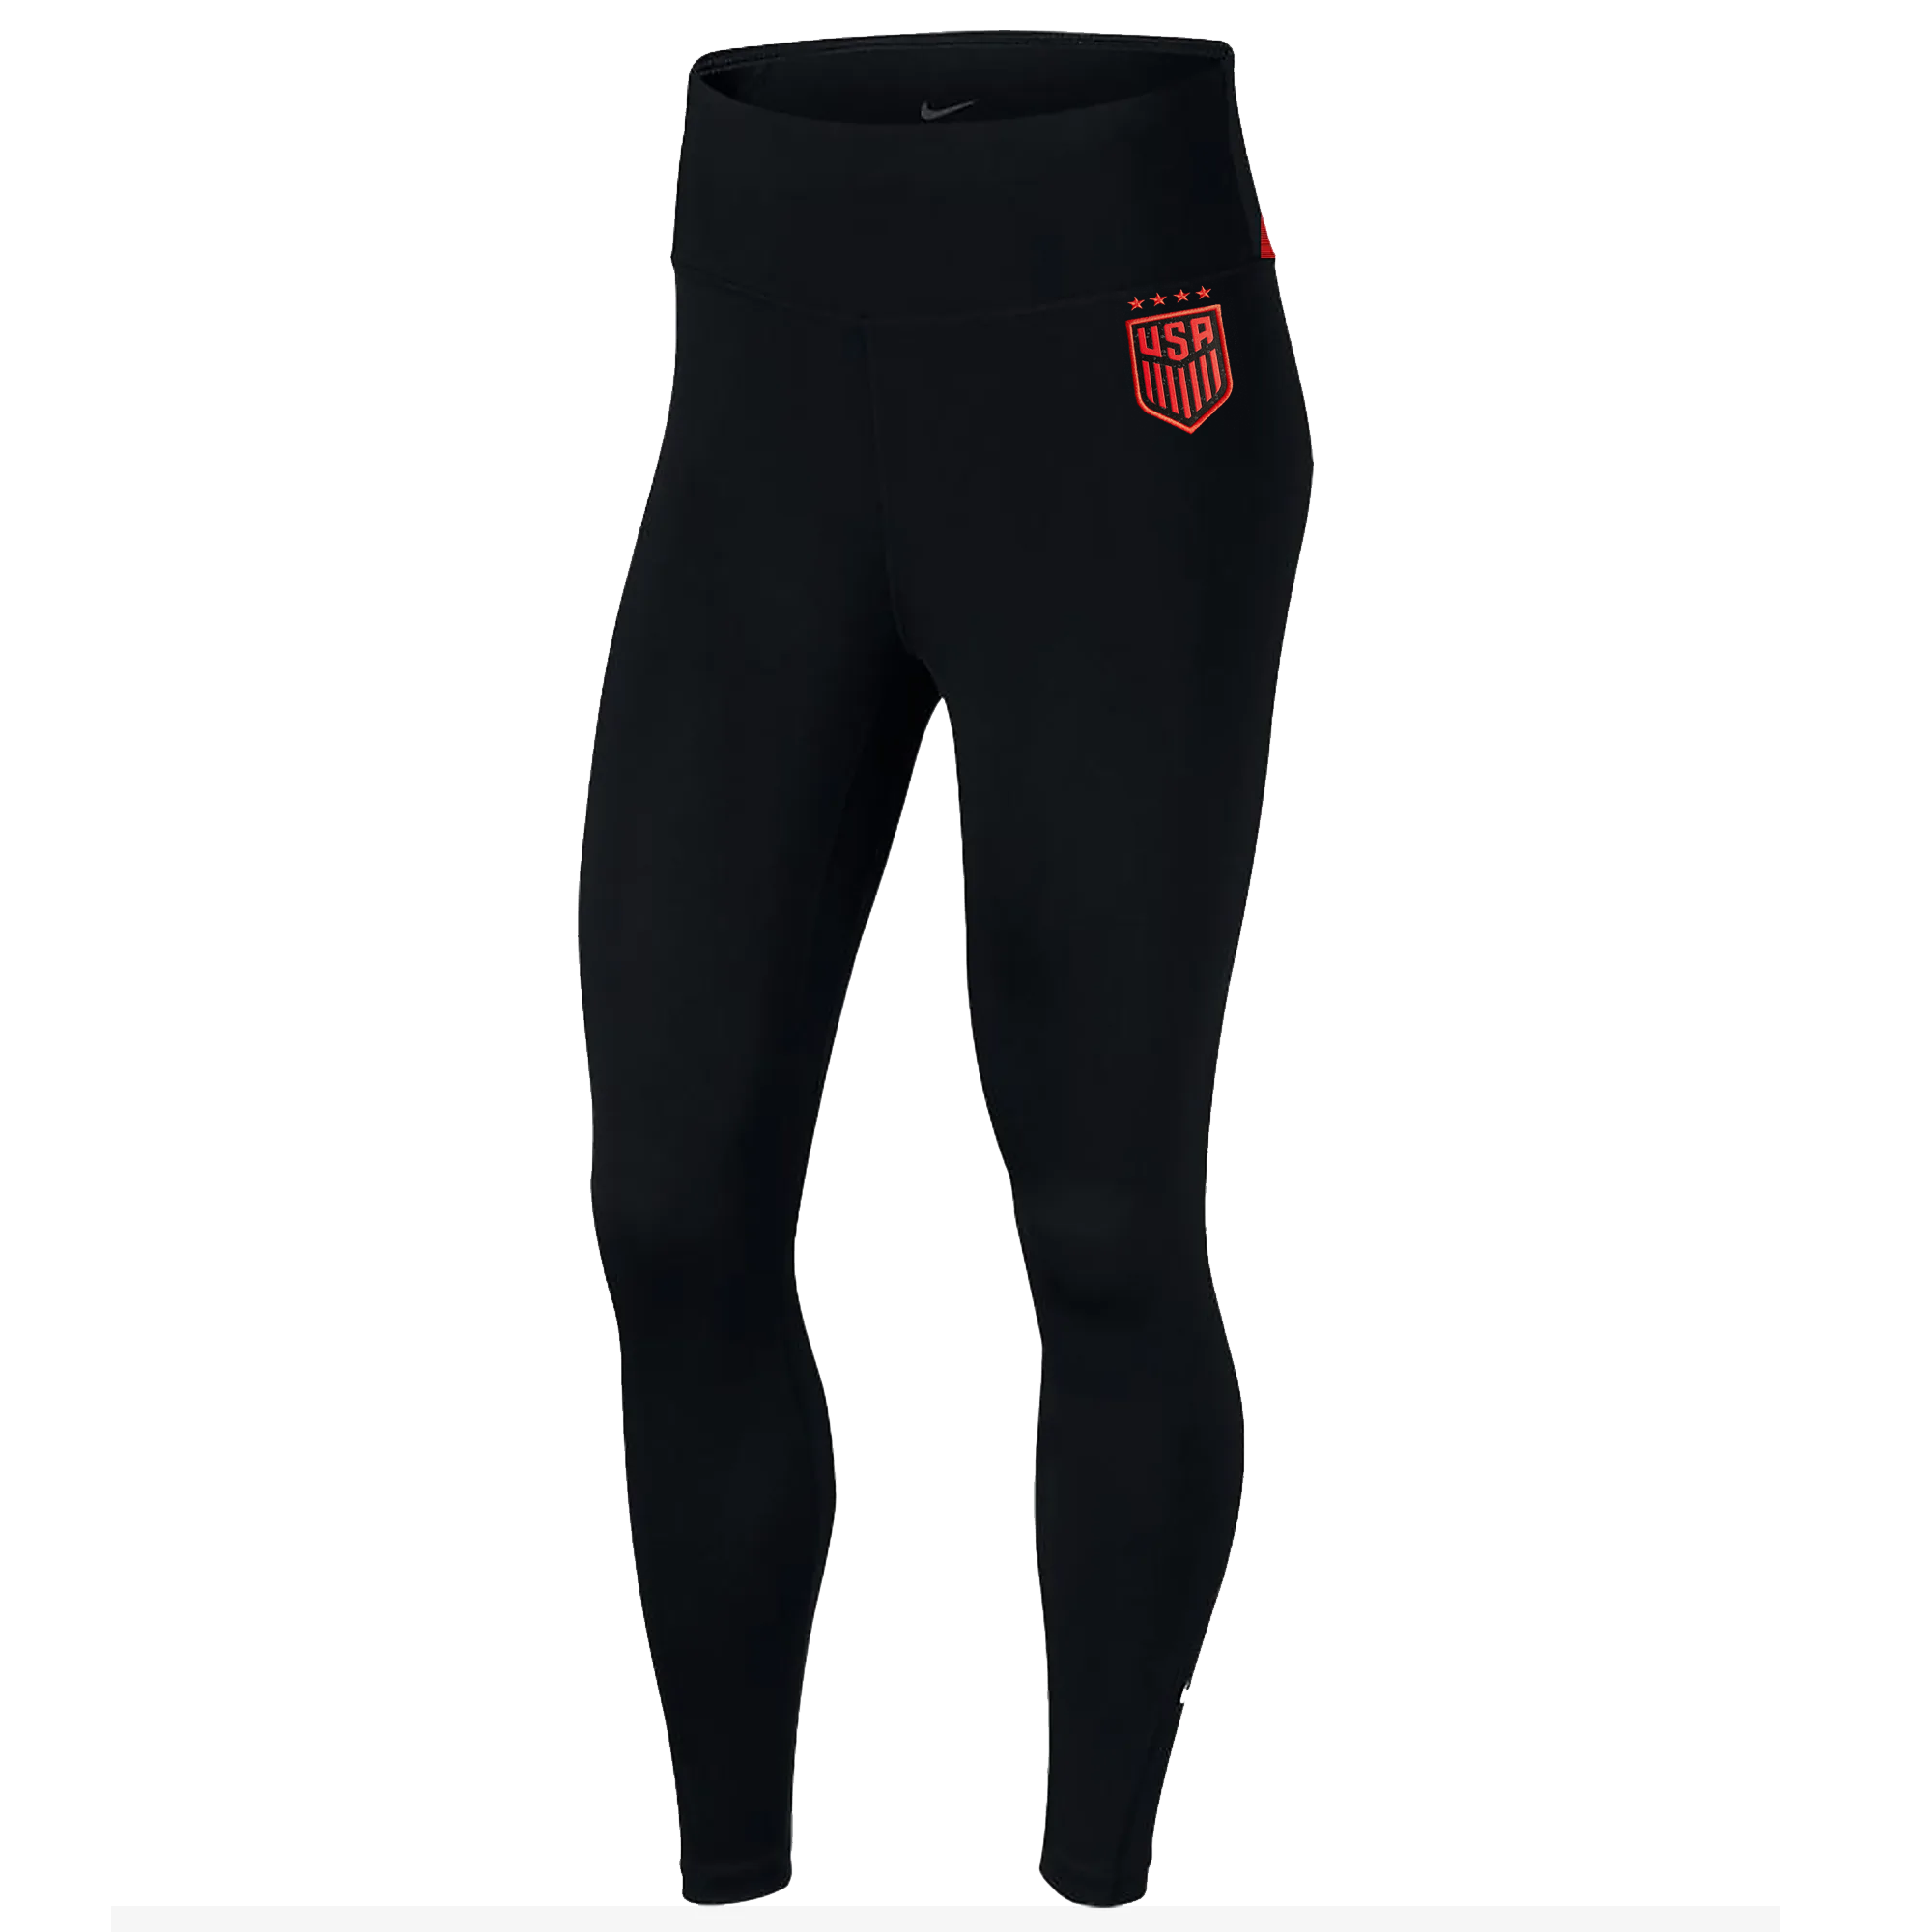 Nike Womens United States One 7/8 Tight Leggings 2.0 (Black/Speed Red) -  Soccer Wearhouse